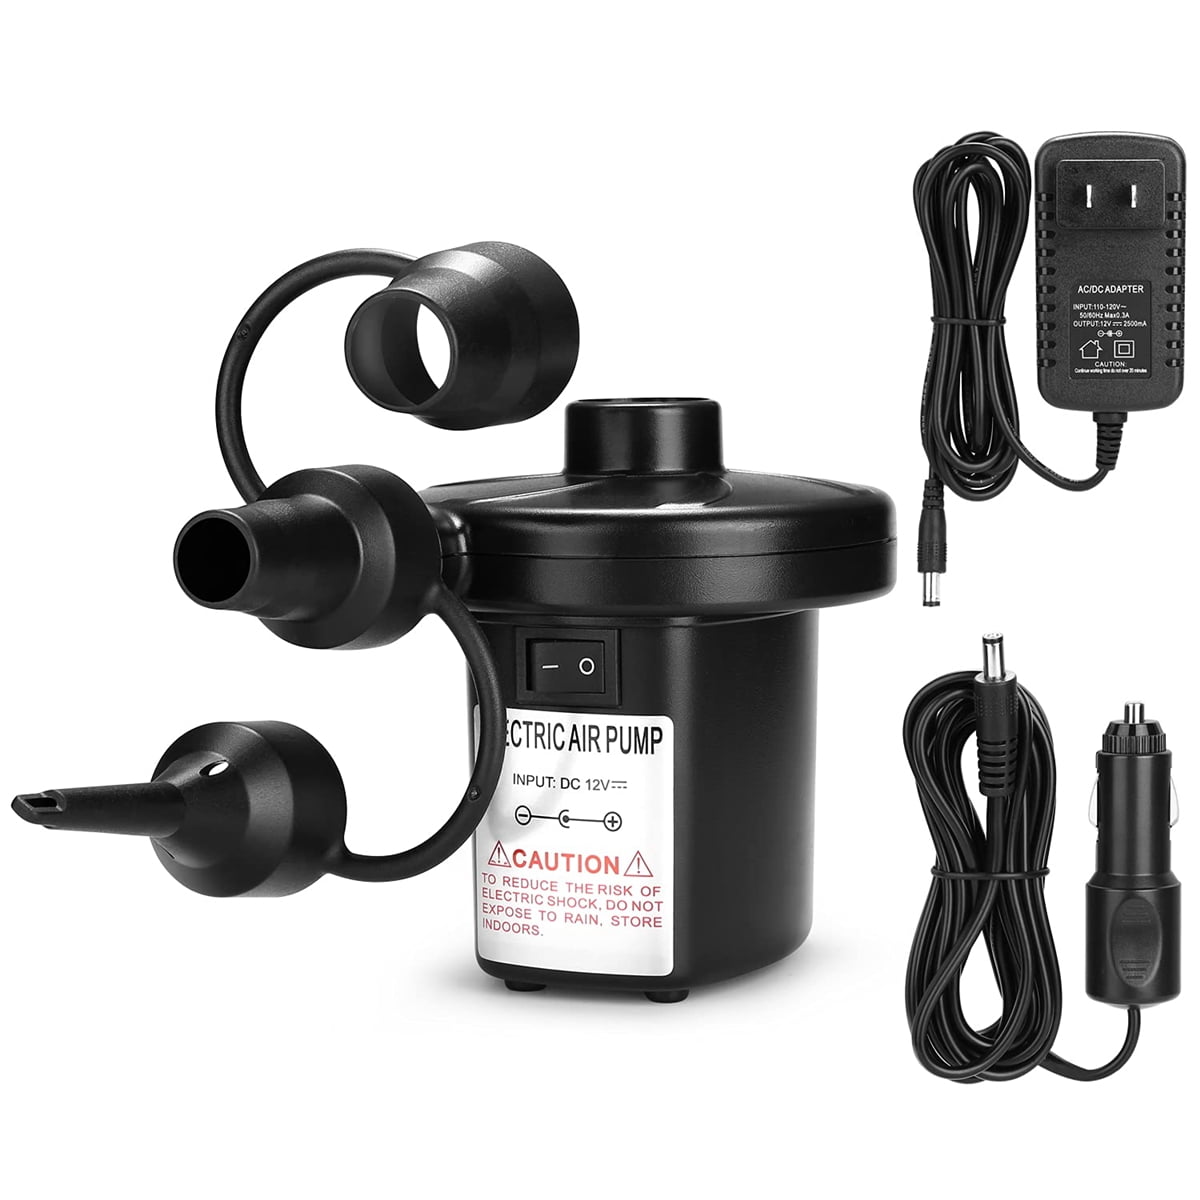 4 D Battery, Not Included B-Qtech Battery Powered Air Pump Quick Inflator & Deflator for Air Beds Toys Lilos Pools 